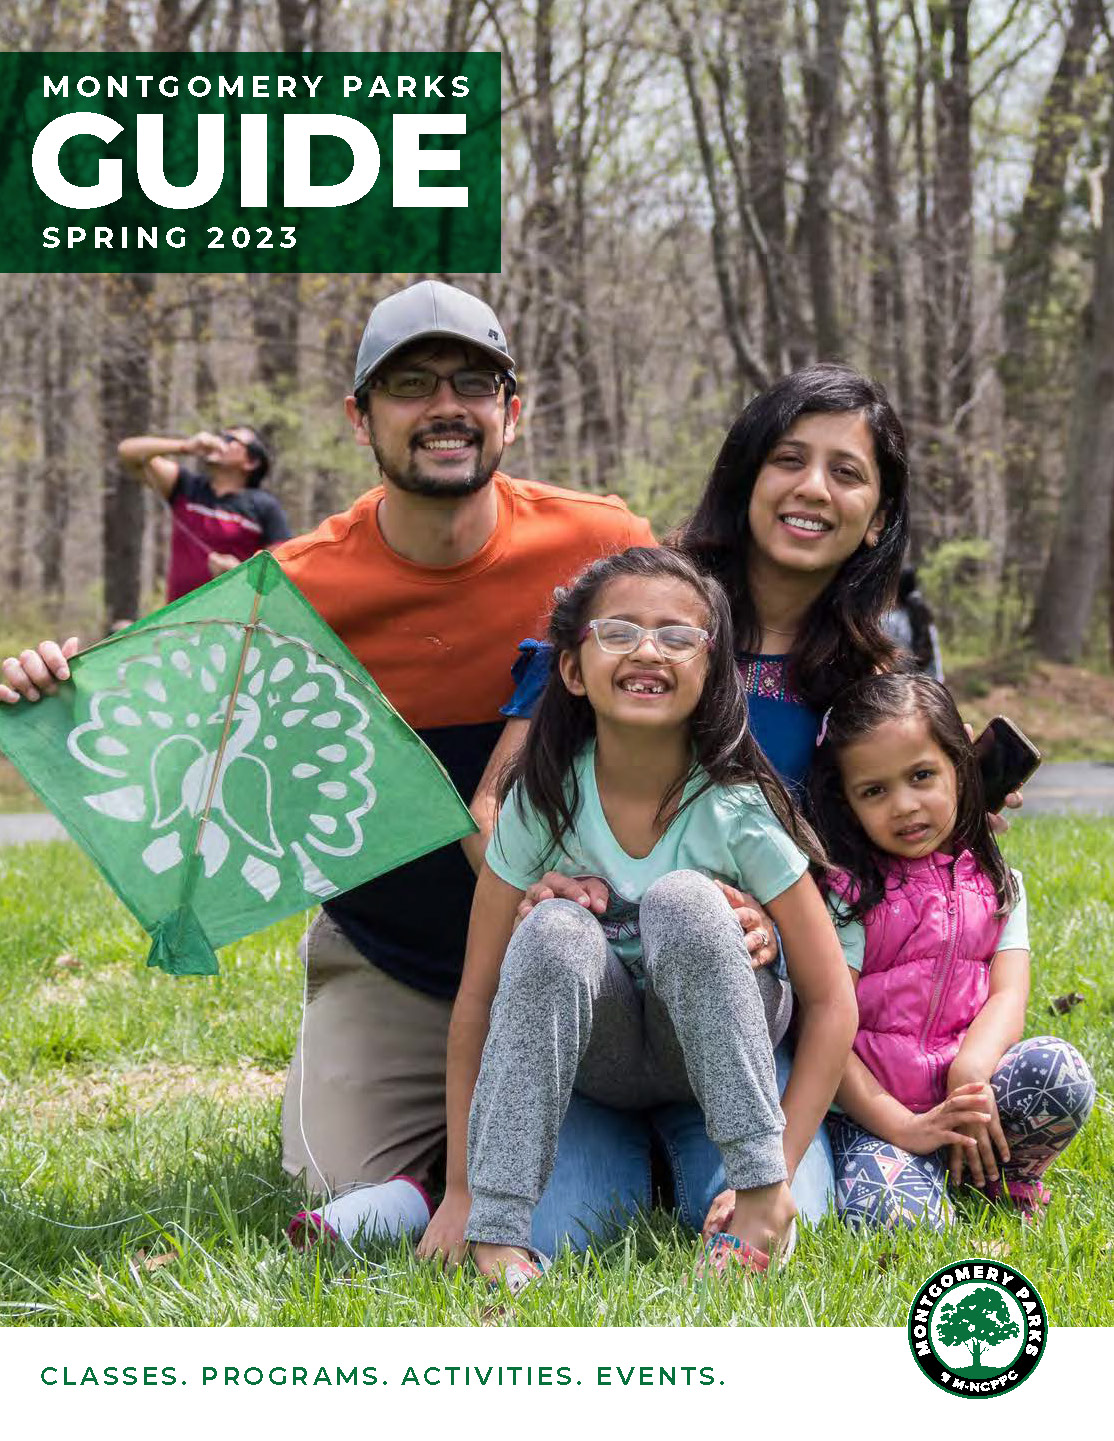 Montgomery Parks Guide Spring 2023. A family poses for a photograph in a park.